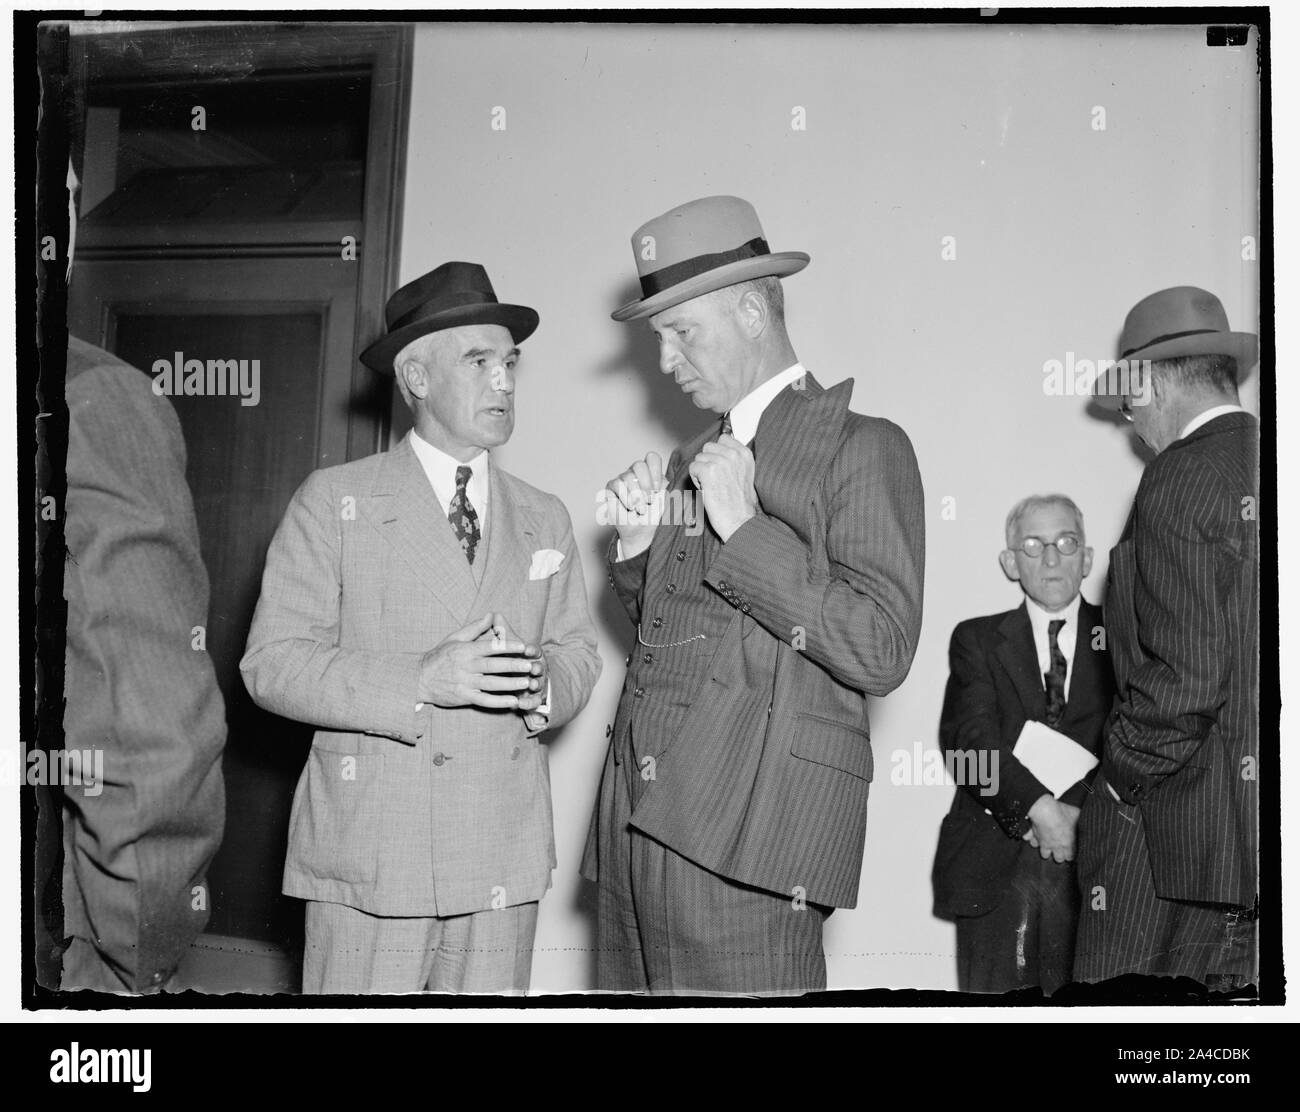 The Winners! Washington, D.C., Sept. 15. Capt. Roger Williams, (left) Vice President of the Newport News Shipbuilding and Dry Dock Co., whose bid of $17,500,000 for the construction of the proposed new vessel to replace the Leviathan in the North Atlantic, was found to be t lowest when the bids were opened by the U.S. Maritime Commission today. John M. Franklin (right), President of the U.S. Lines which will operate the new liner. When completed the new vessel will be a twin screw, combination mail, passenger and cargo carrier, and will give the American Merchant Fleet the safest vessel afloat Stock Photo